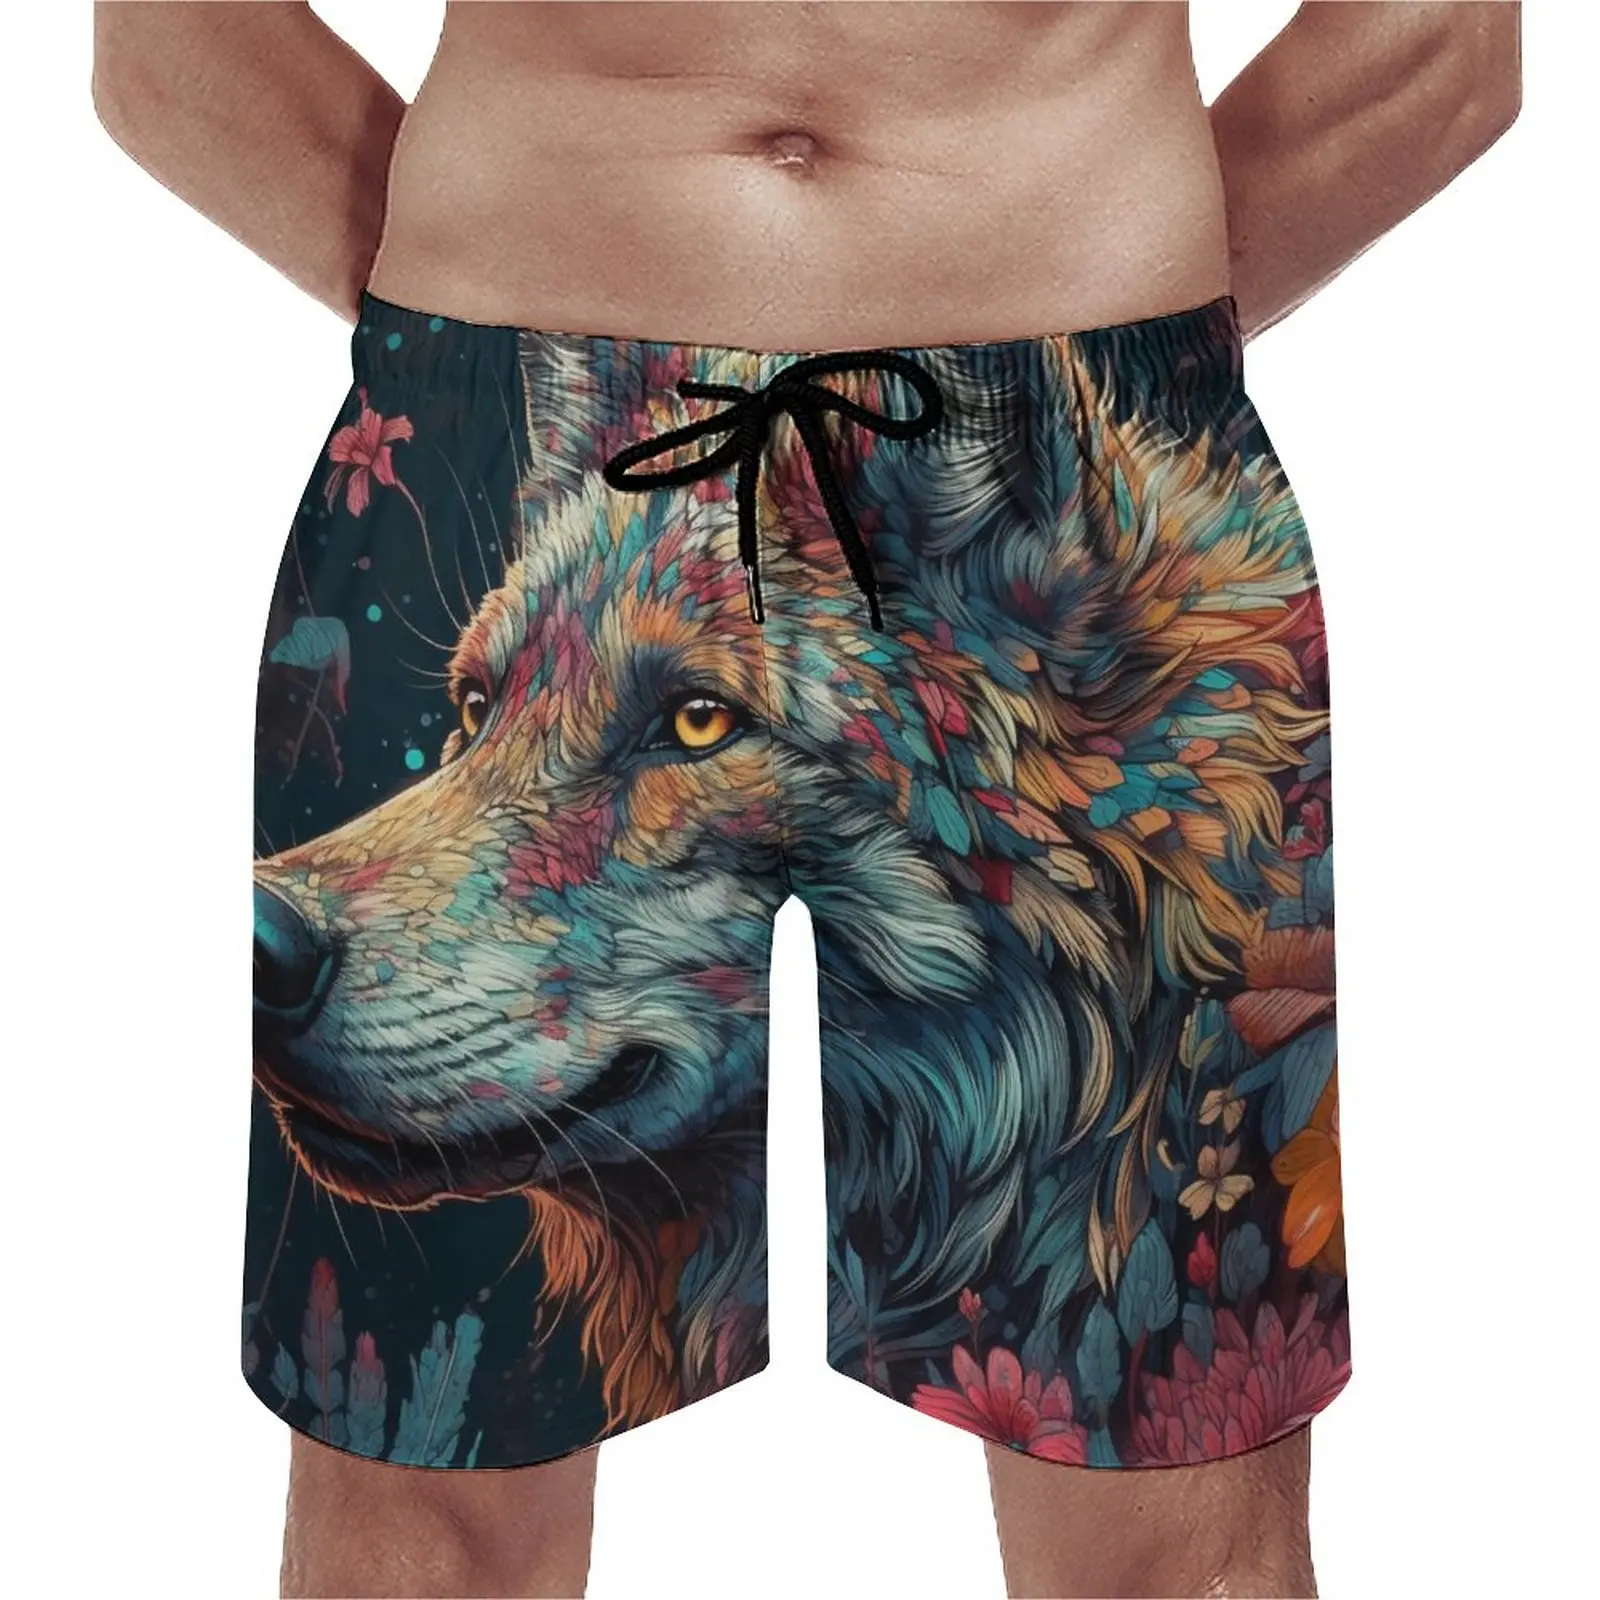 

Summer Gym Shorts Wolf Sports Surf Neon Colorful Painting Custom Beach Short Pants Casual Quick Dry Beach Trunks Big Size